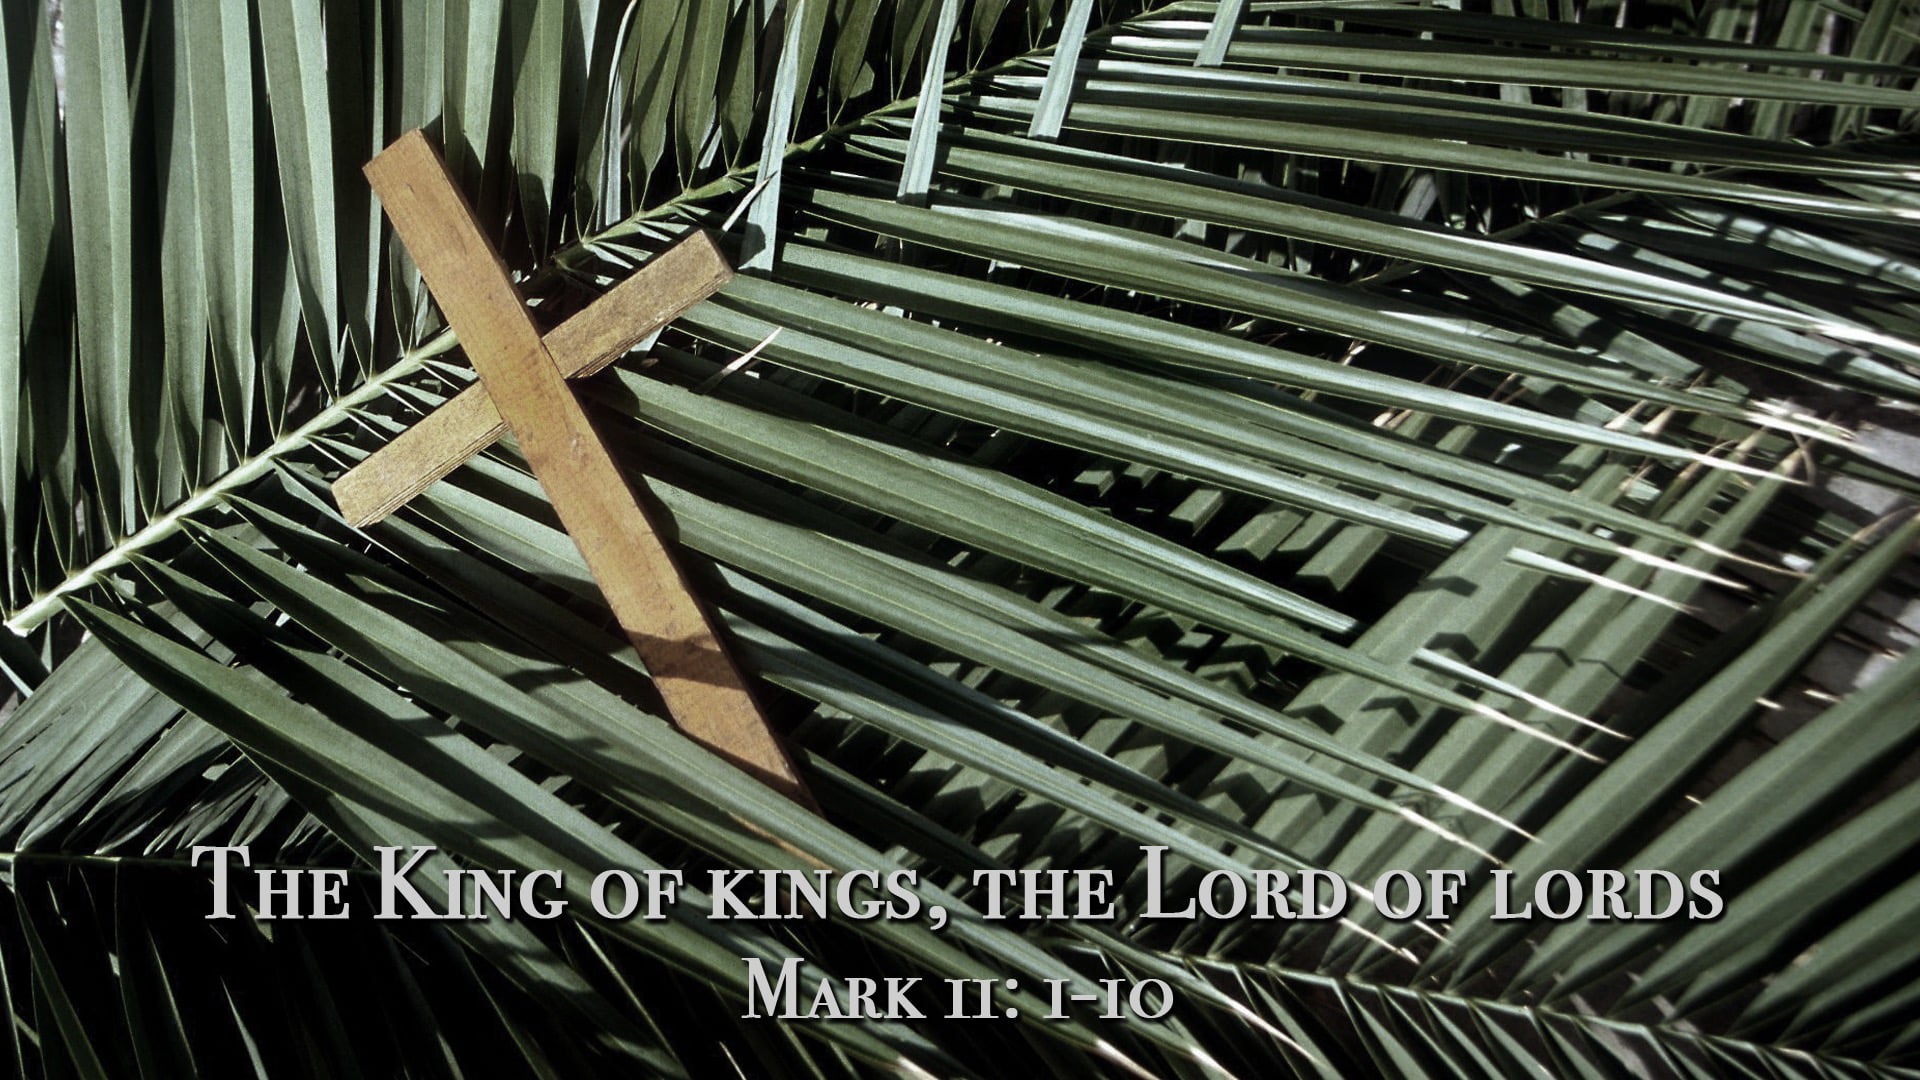 [March 24, 2018] The King of Kings, The Lord of Lords